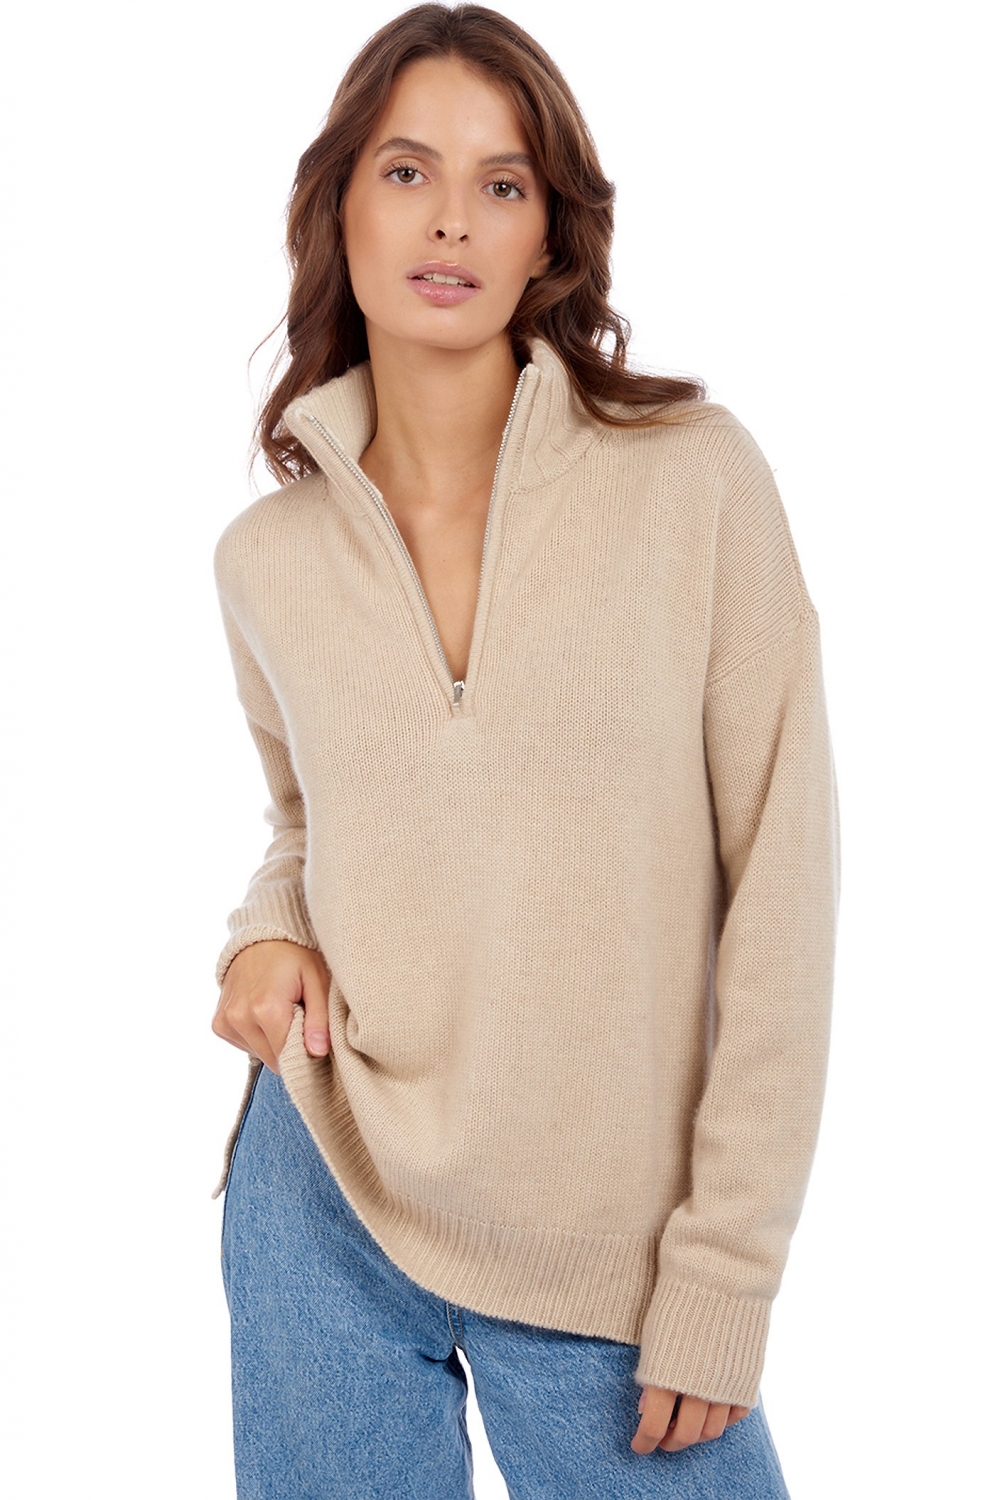 Cashmere ladies our full range of women s sweaters alizette natural beige 3xl